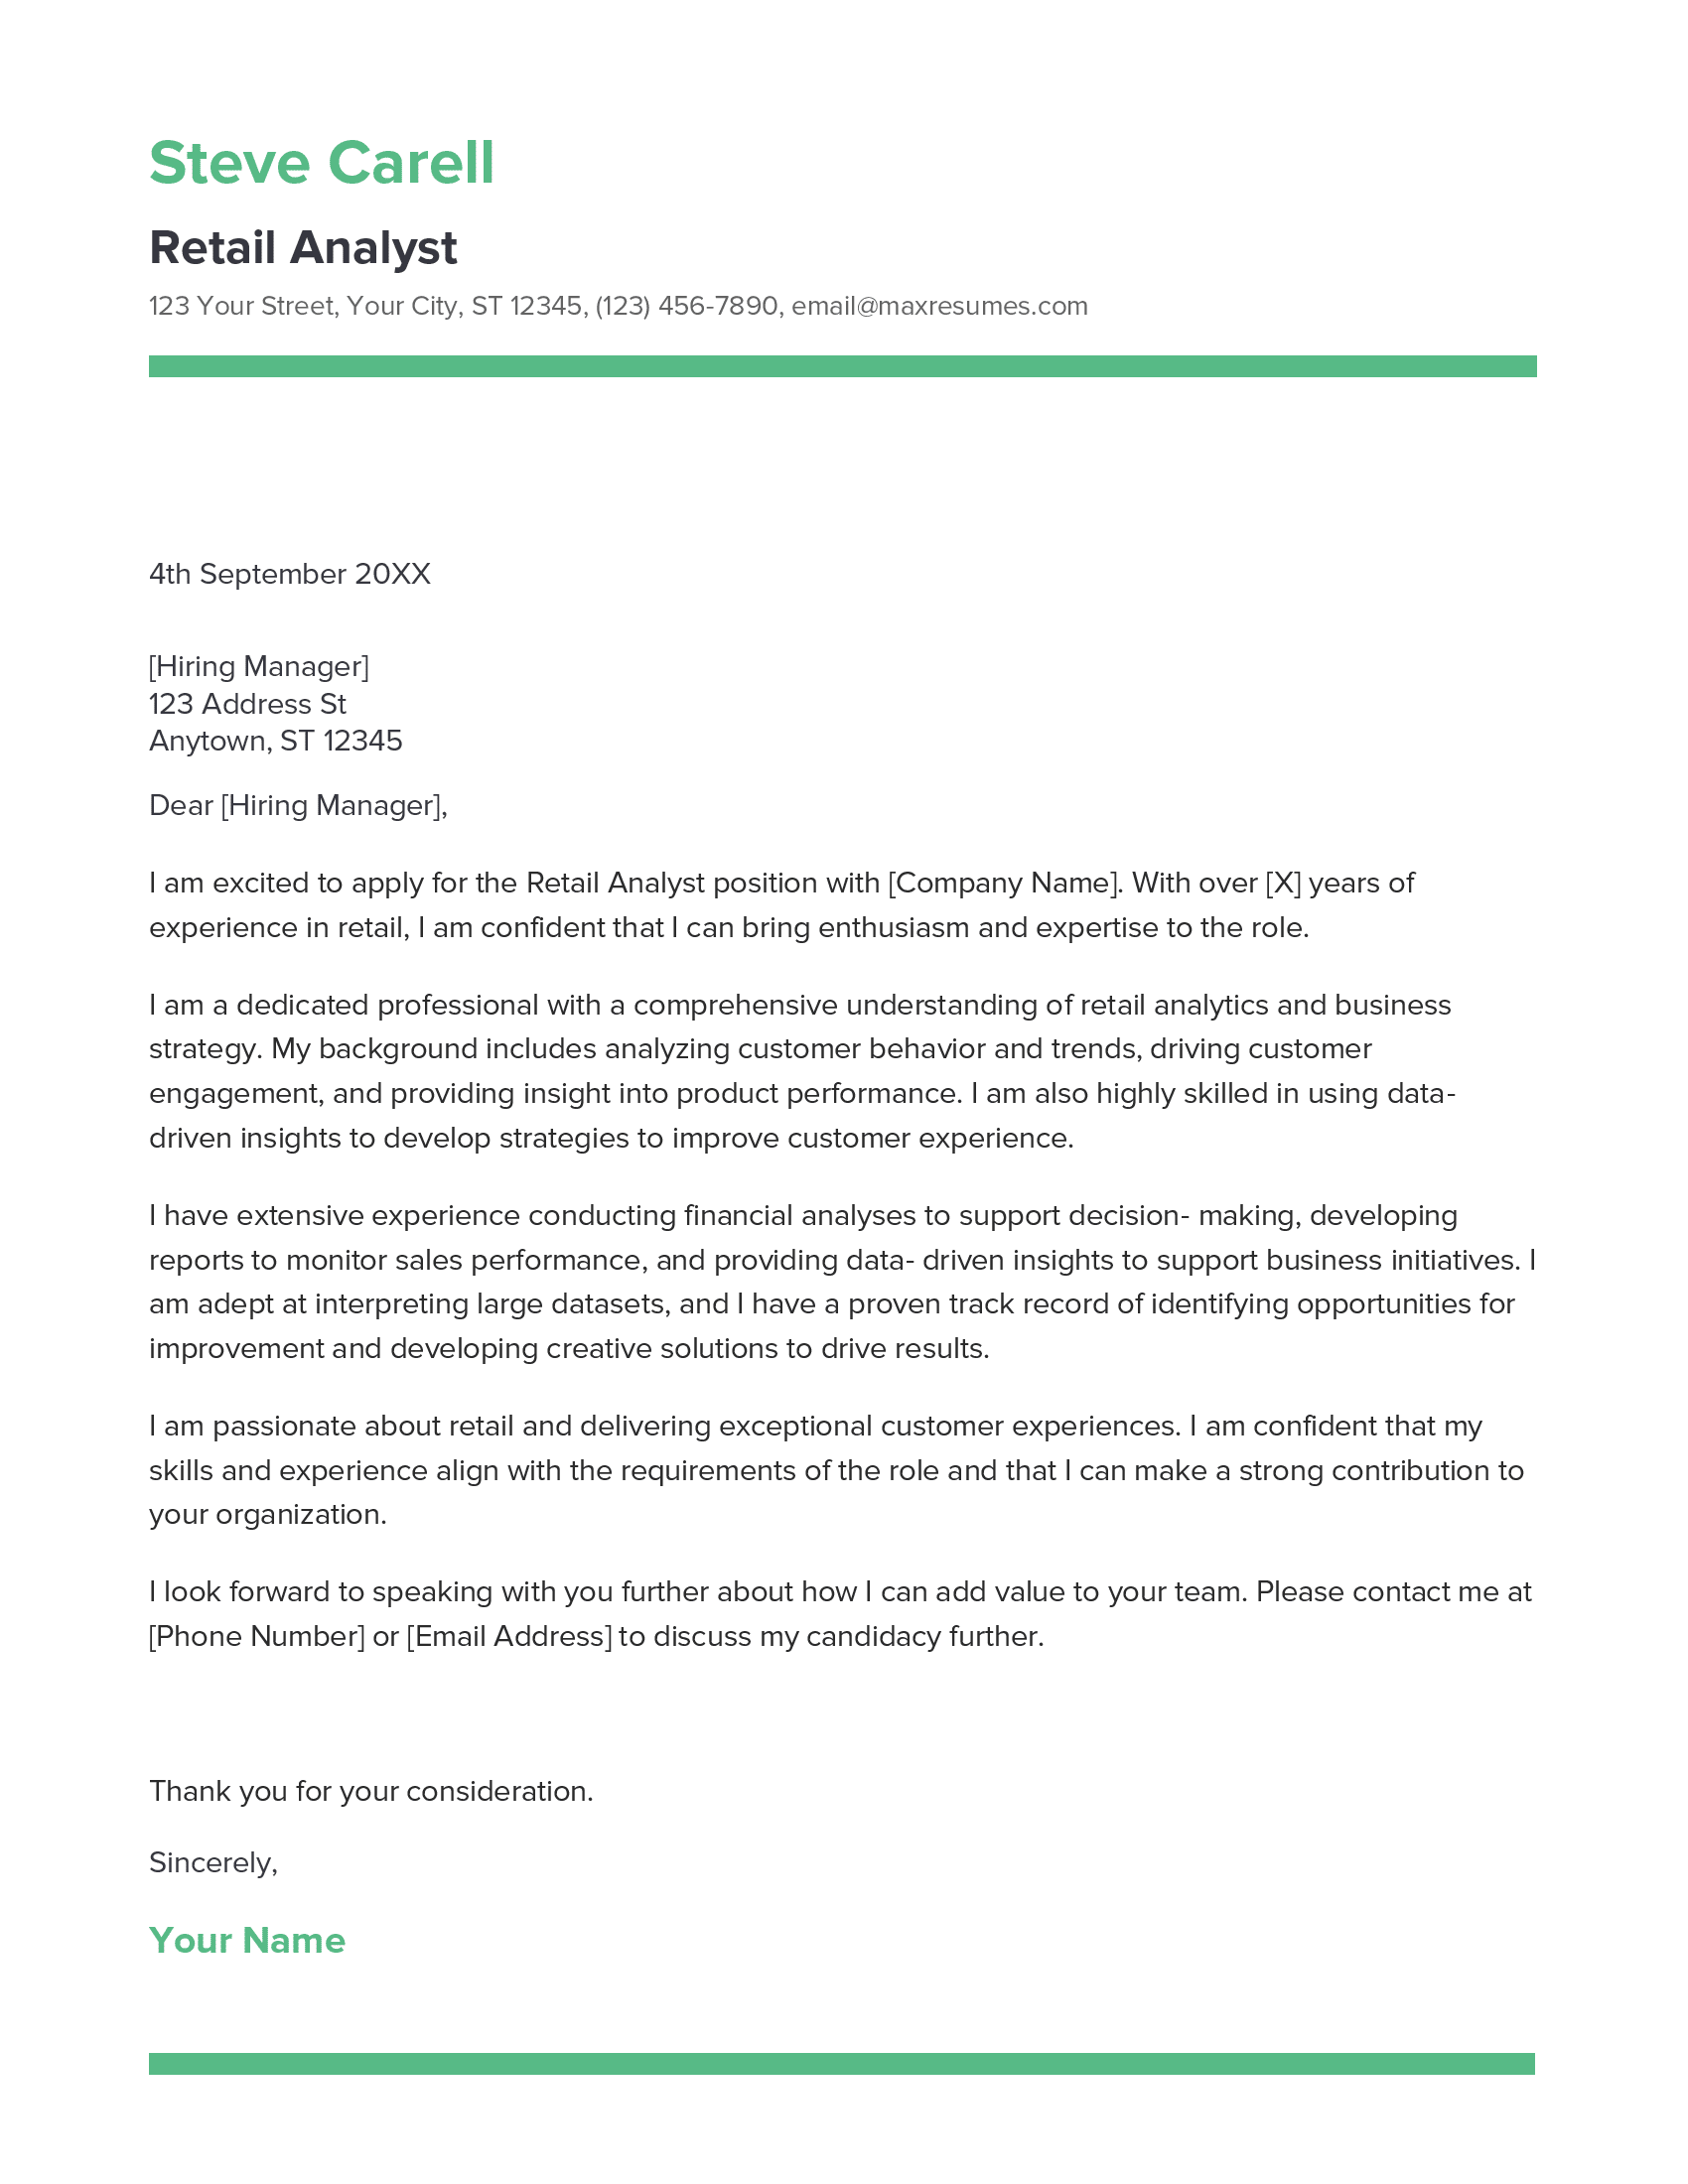 Retail Analyst Cover Letter Example